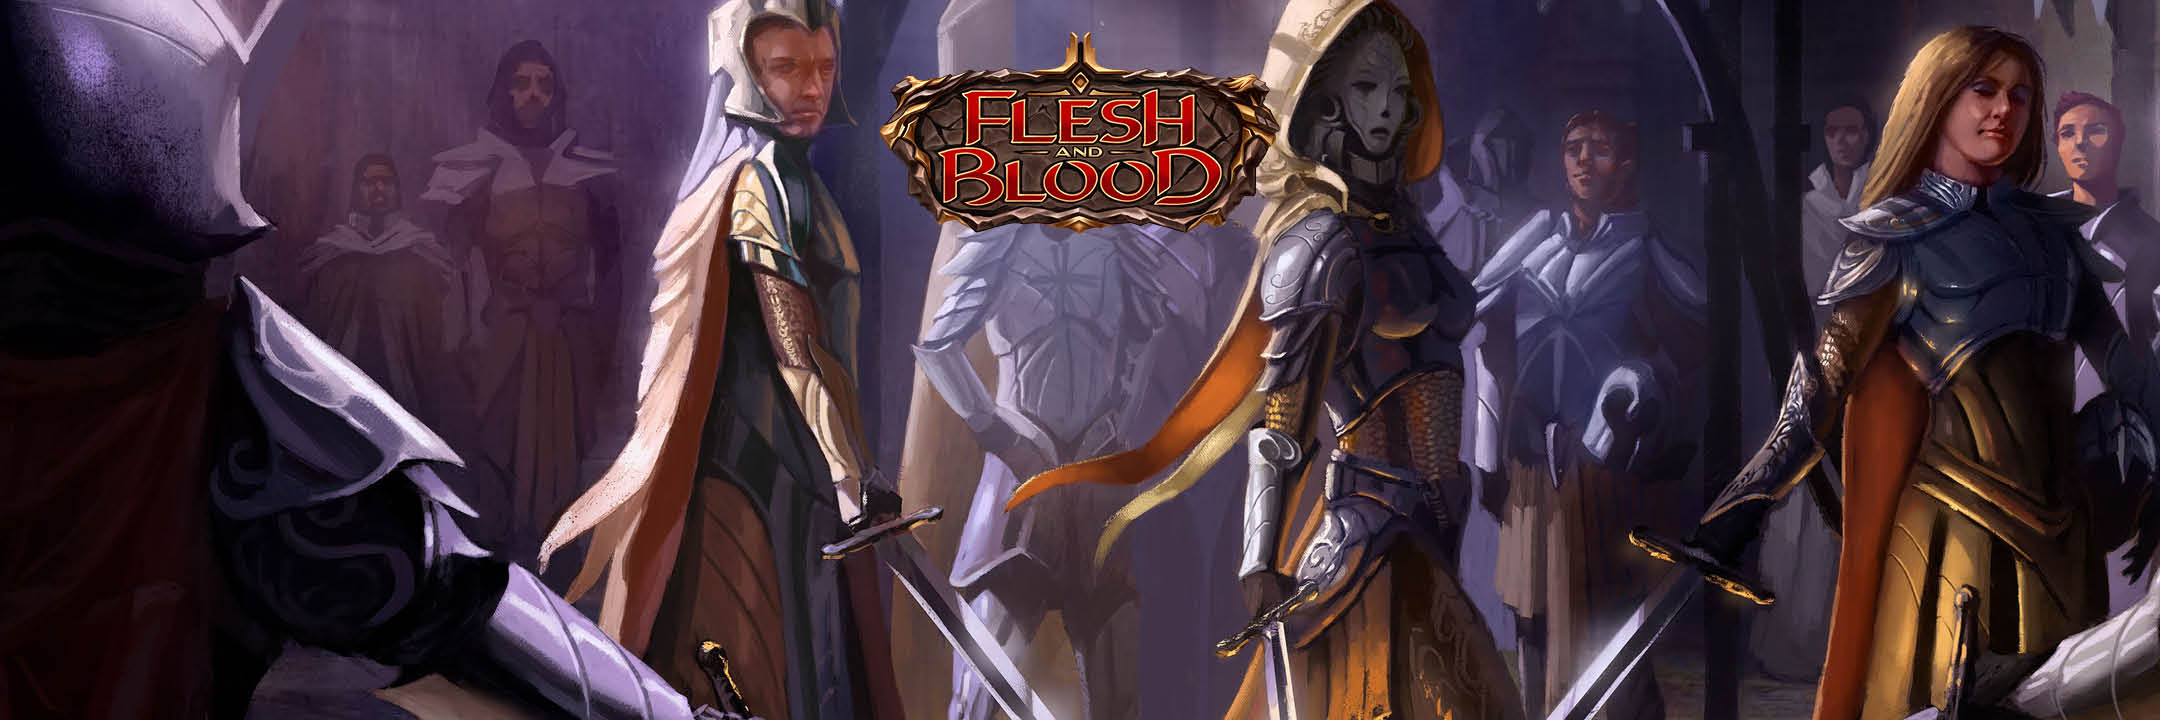 flesh and blood events match by fyendal hobby